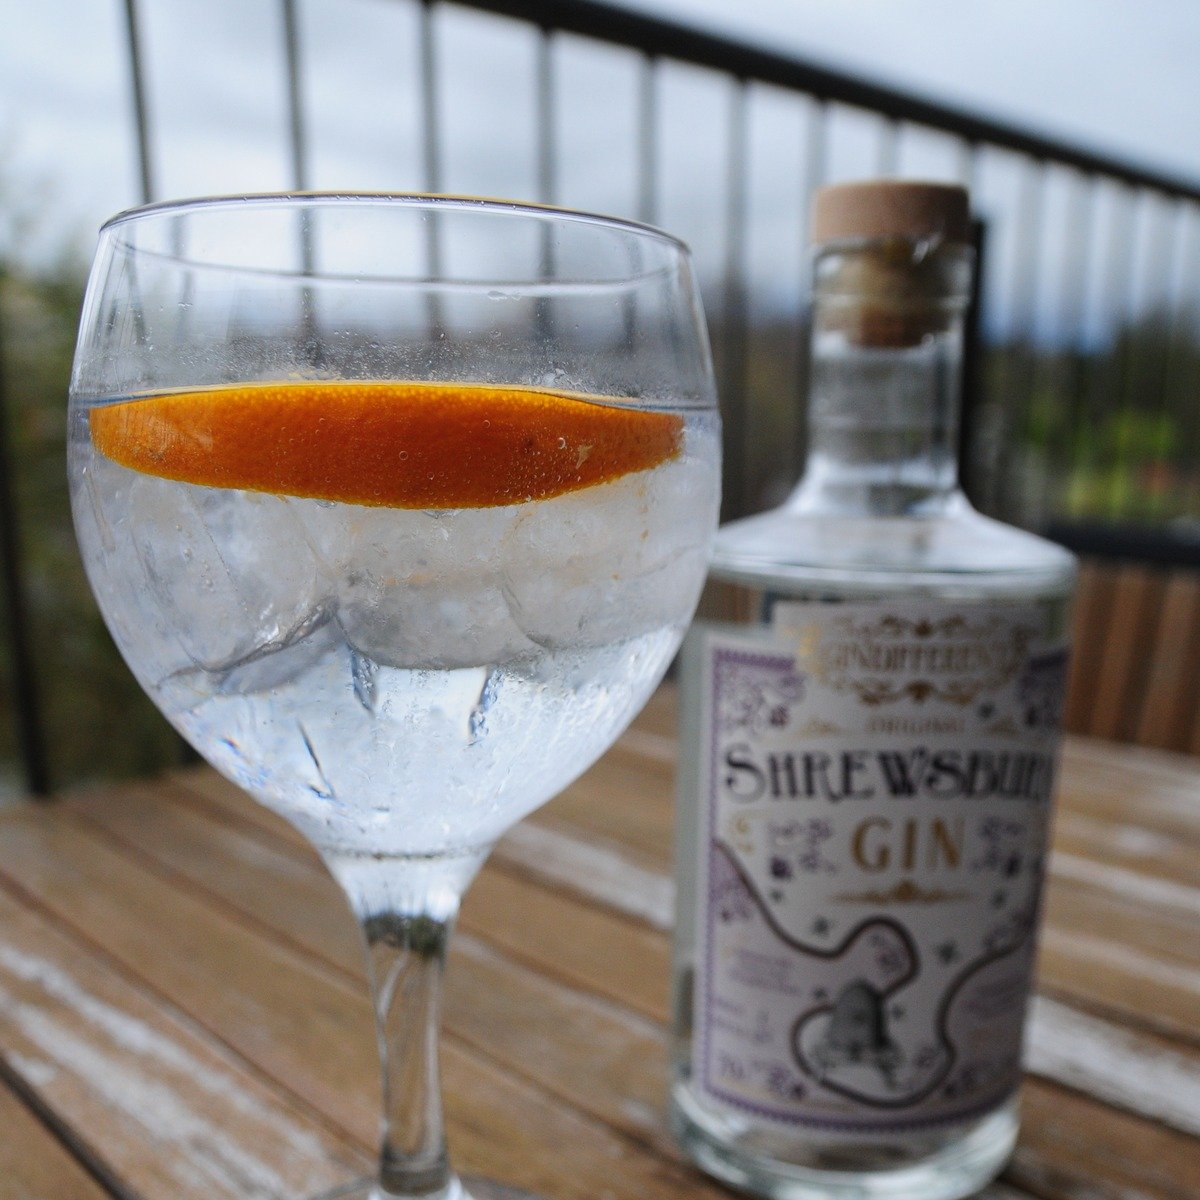 Savour the magic of a Shrewsbury Gin on our rooftop terrace, as you watch the sun dip below the horizon, painting the sky in hues of gold and pink over our historic town. 🌅 

🤔🫵Did you know? You can drop by for drinks in the evening, even if you'r